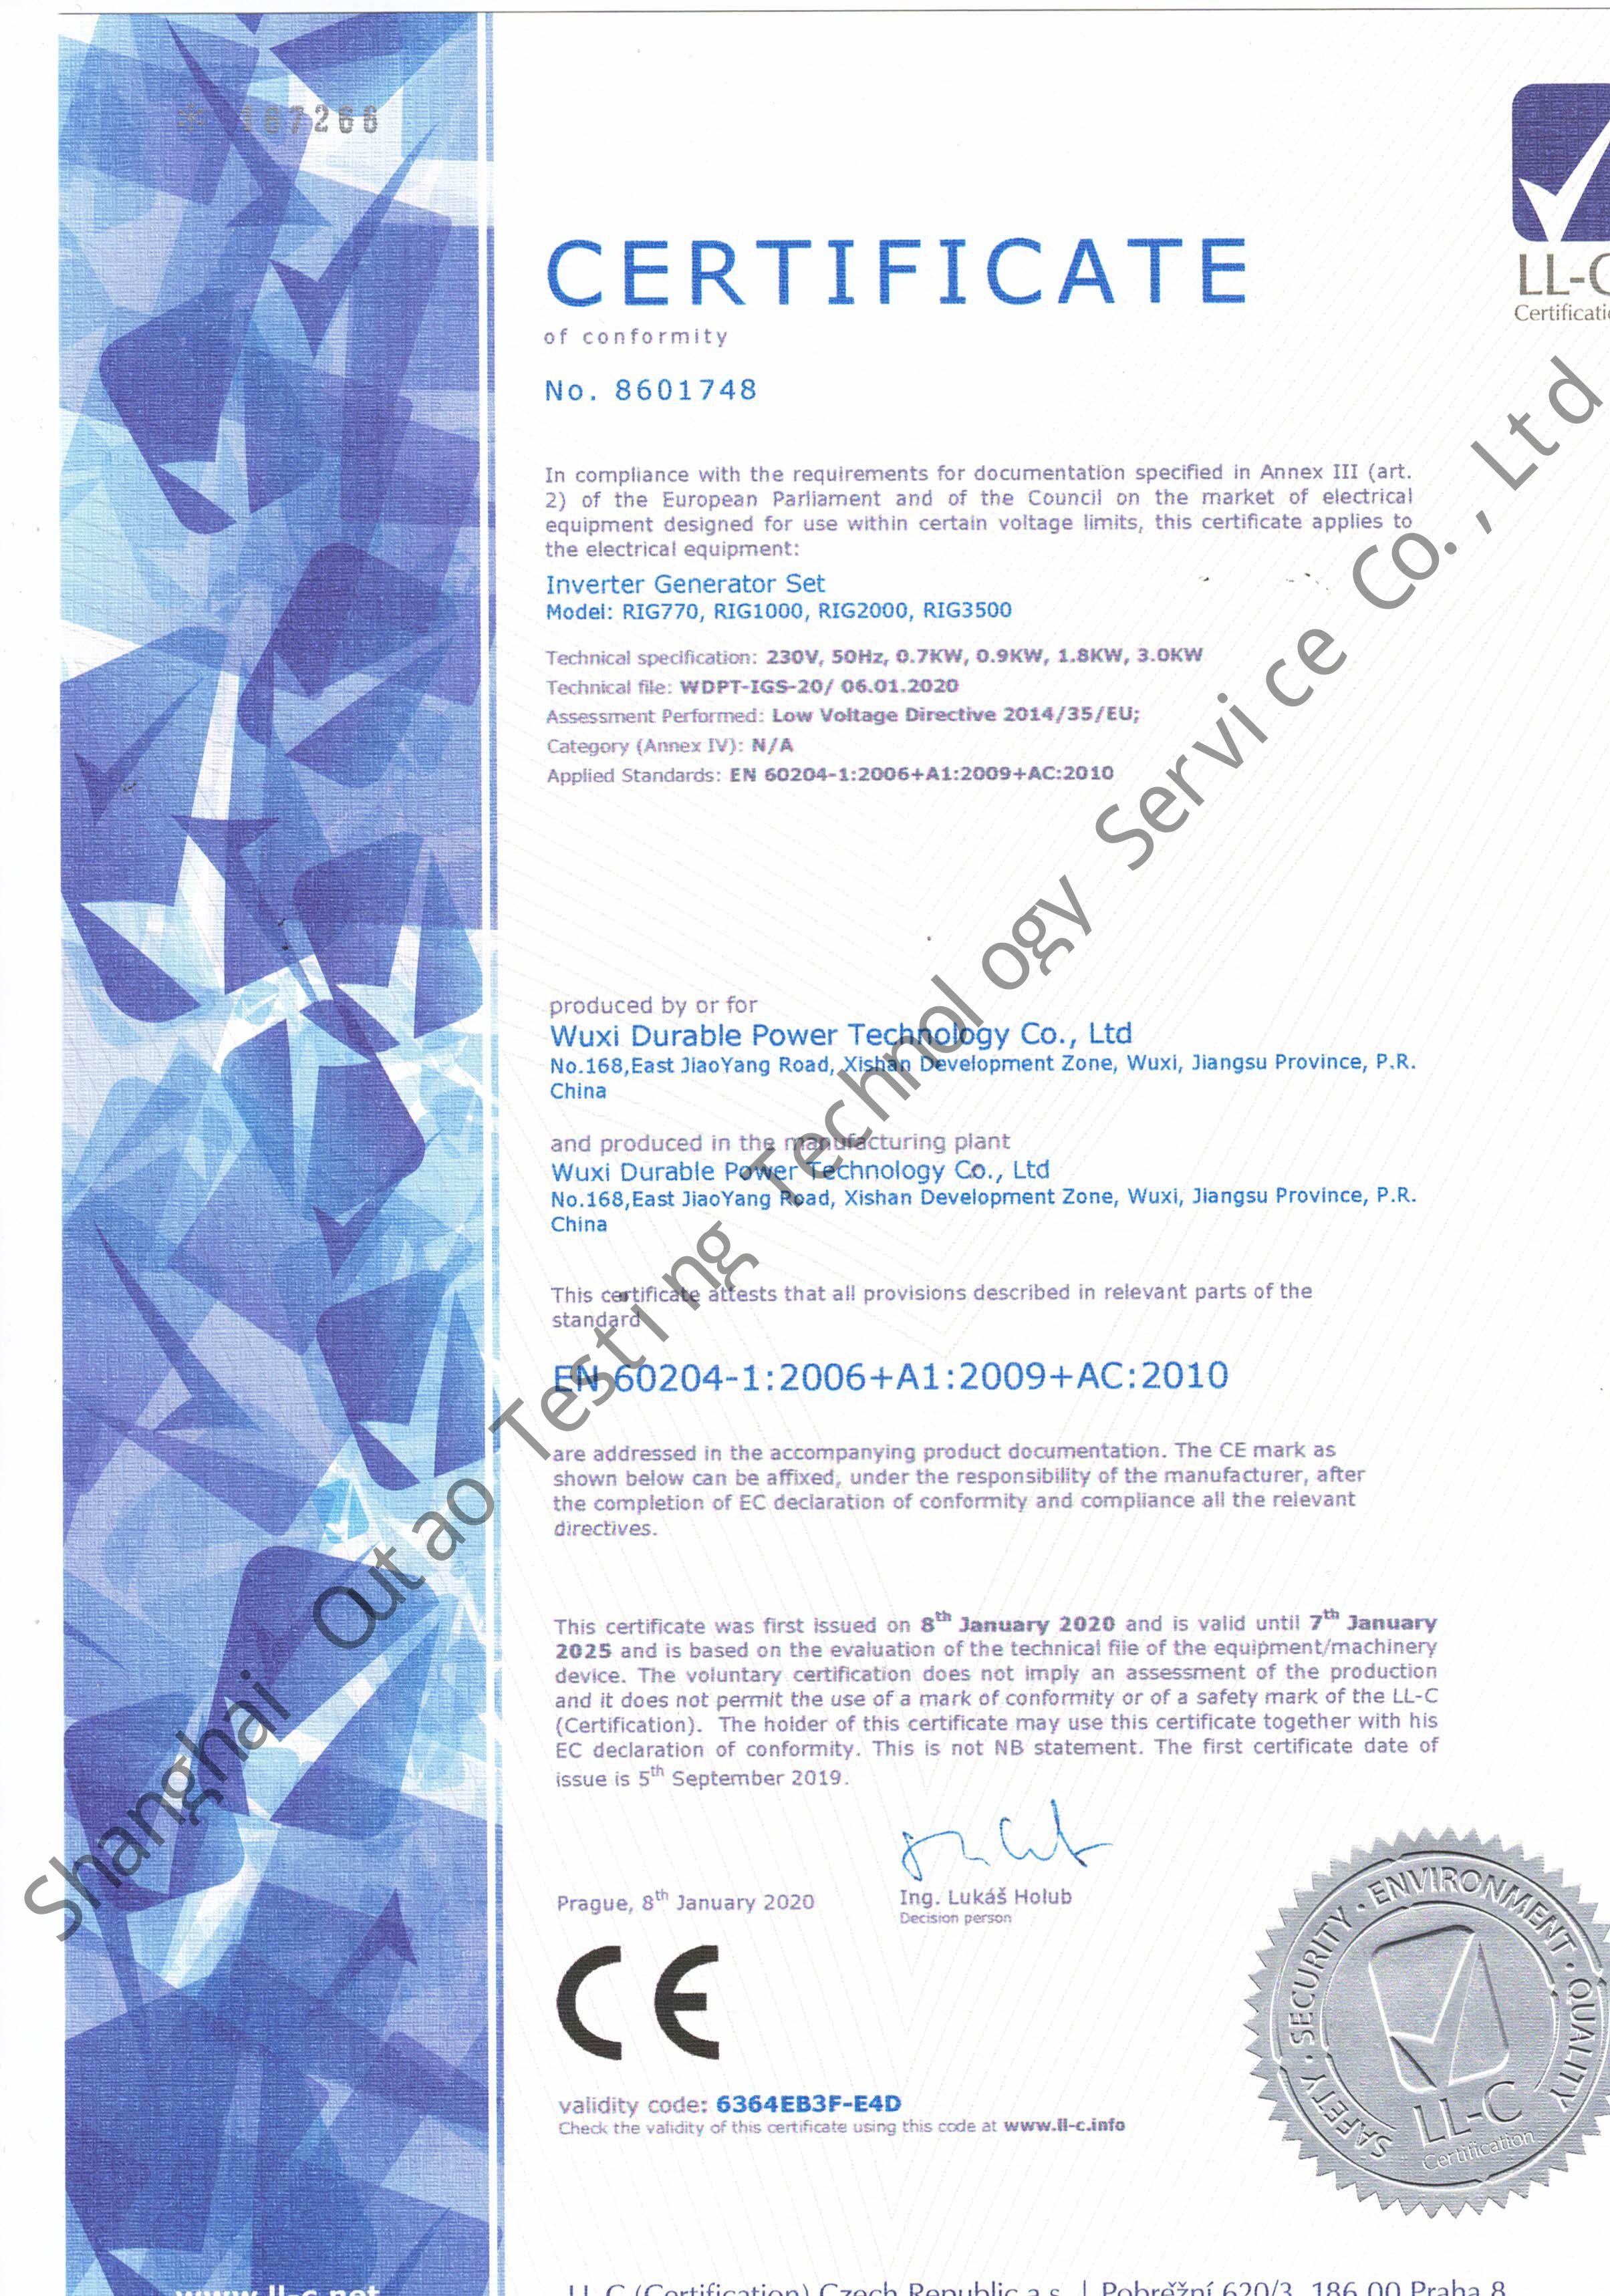 WUXI DURABLE POWER TECHNOLOGY CO.,LTD Certifications